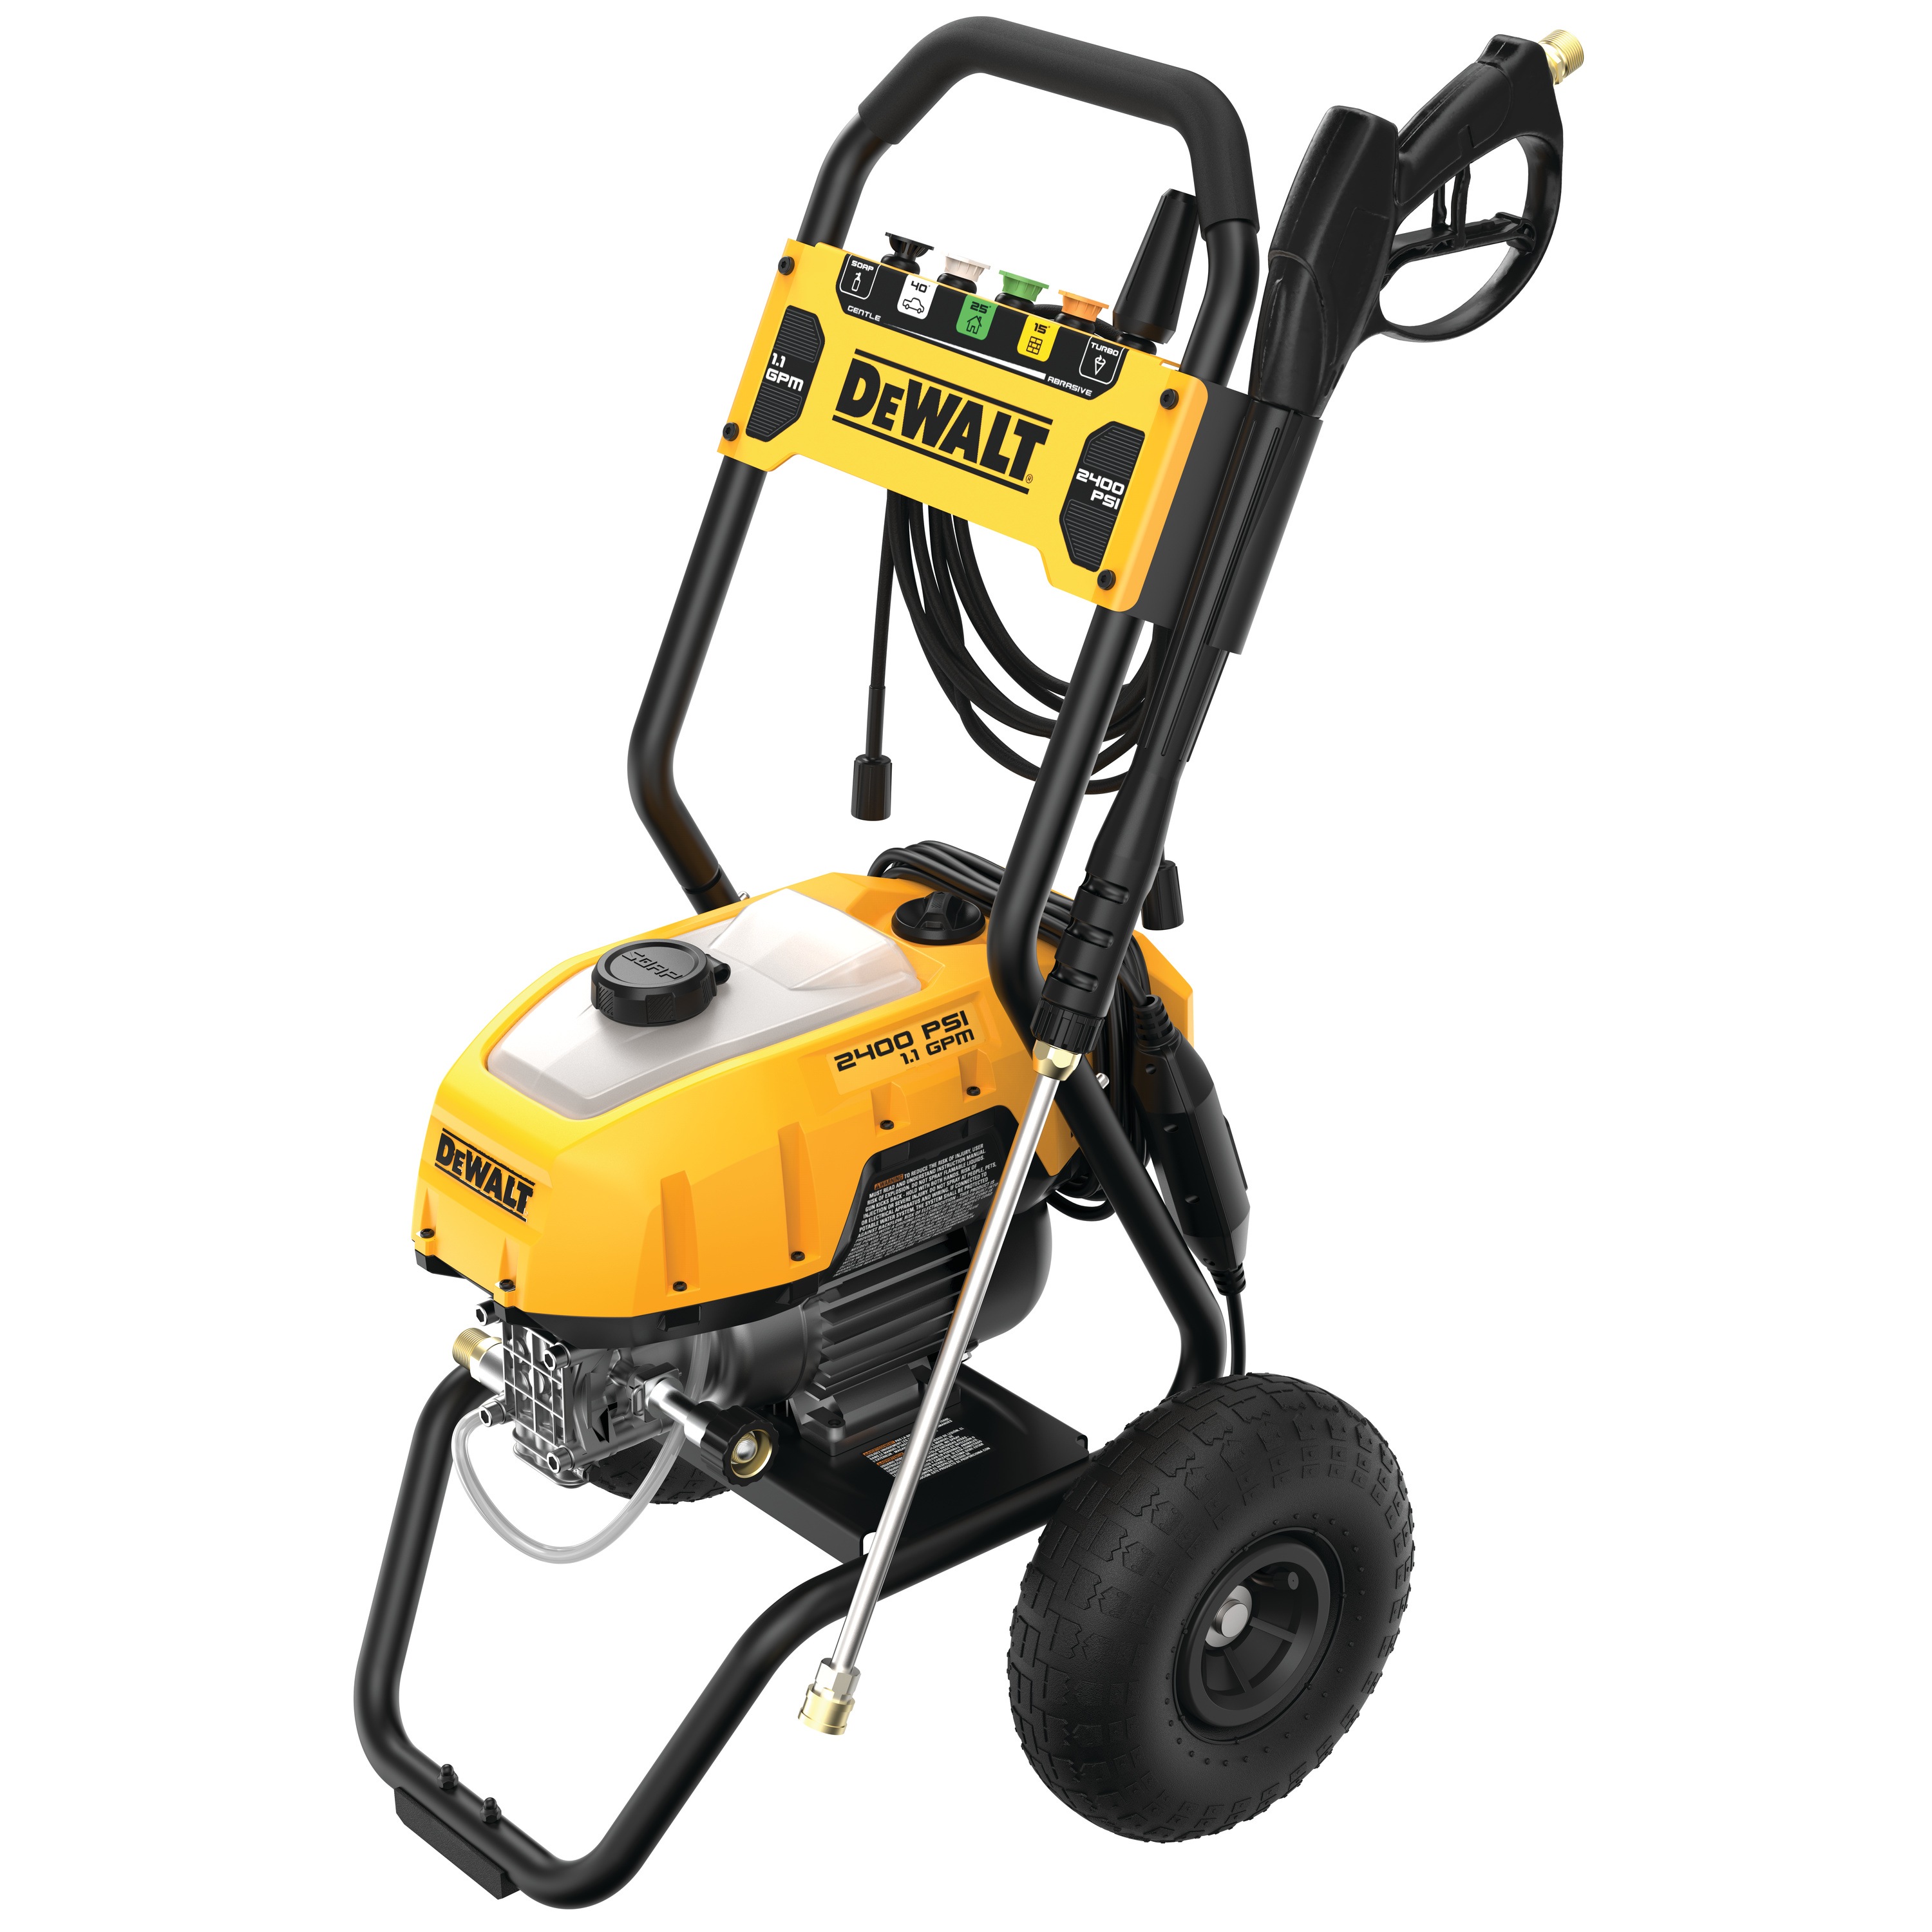 Profile of electric cold water pressure washer.